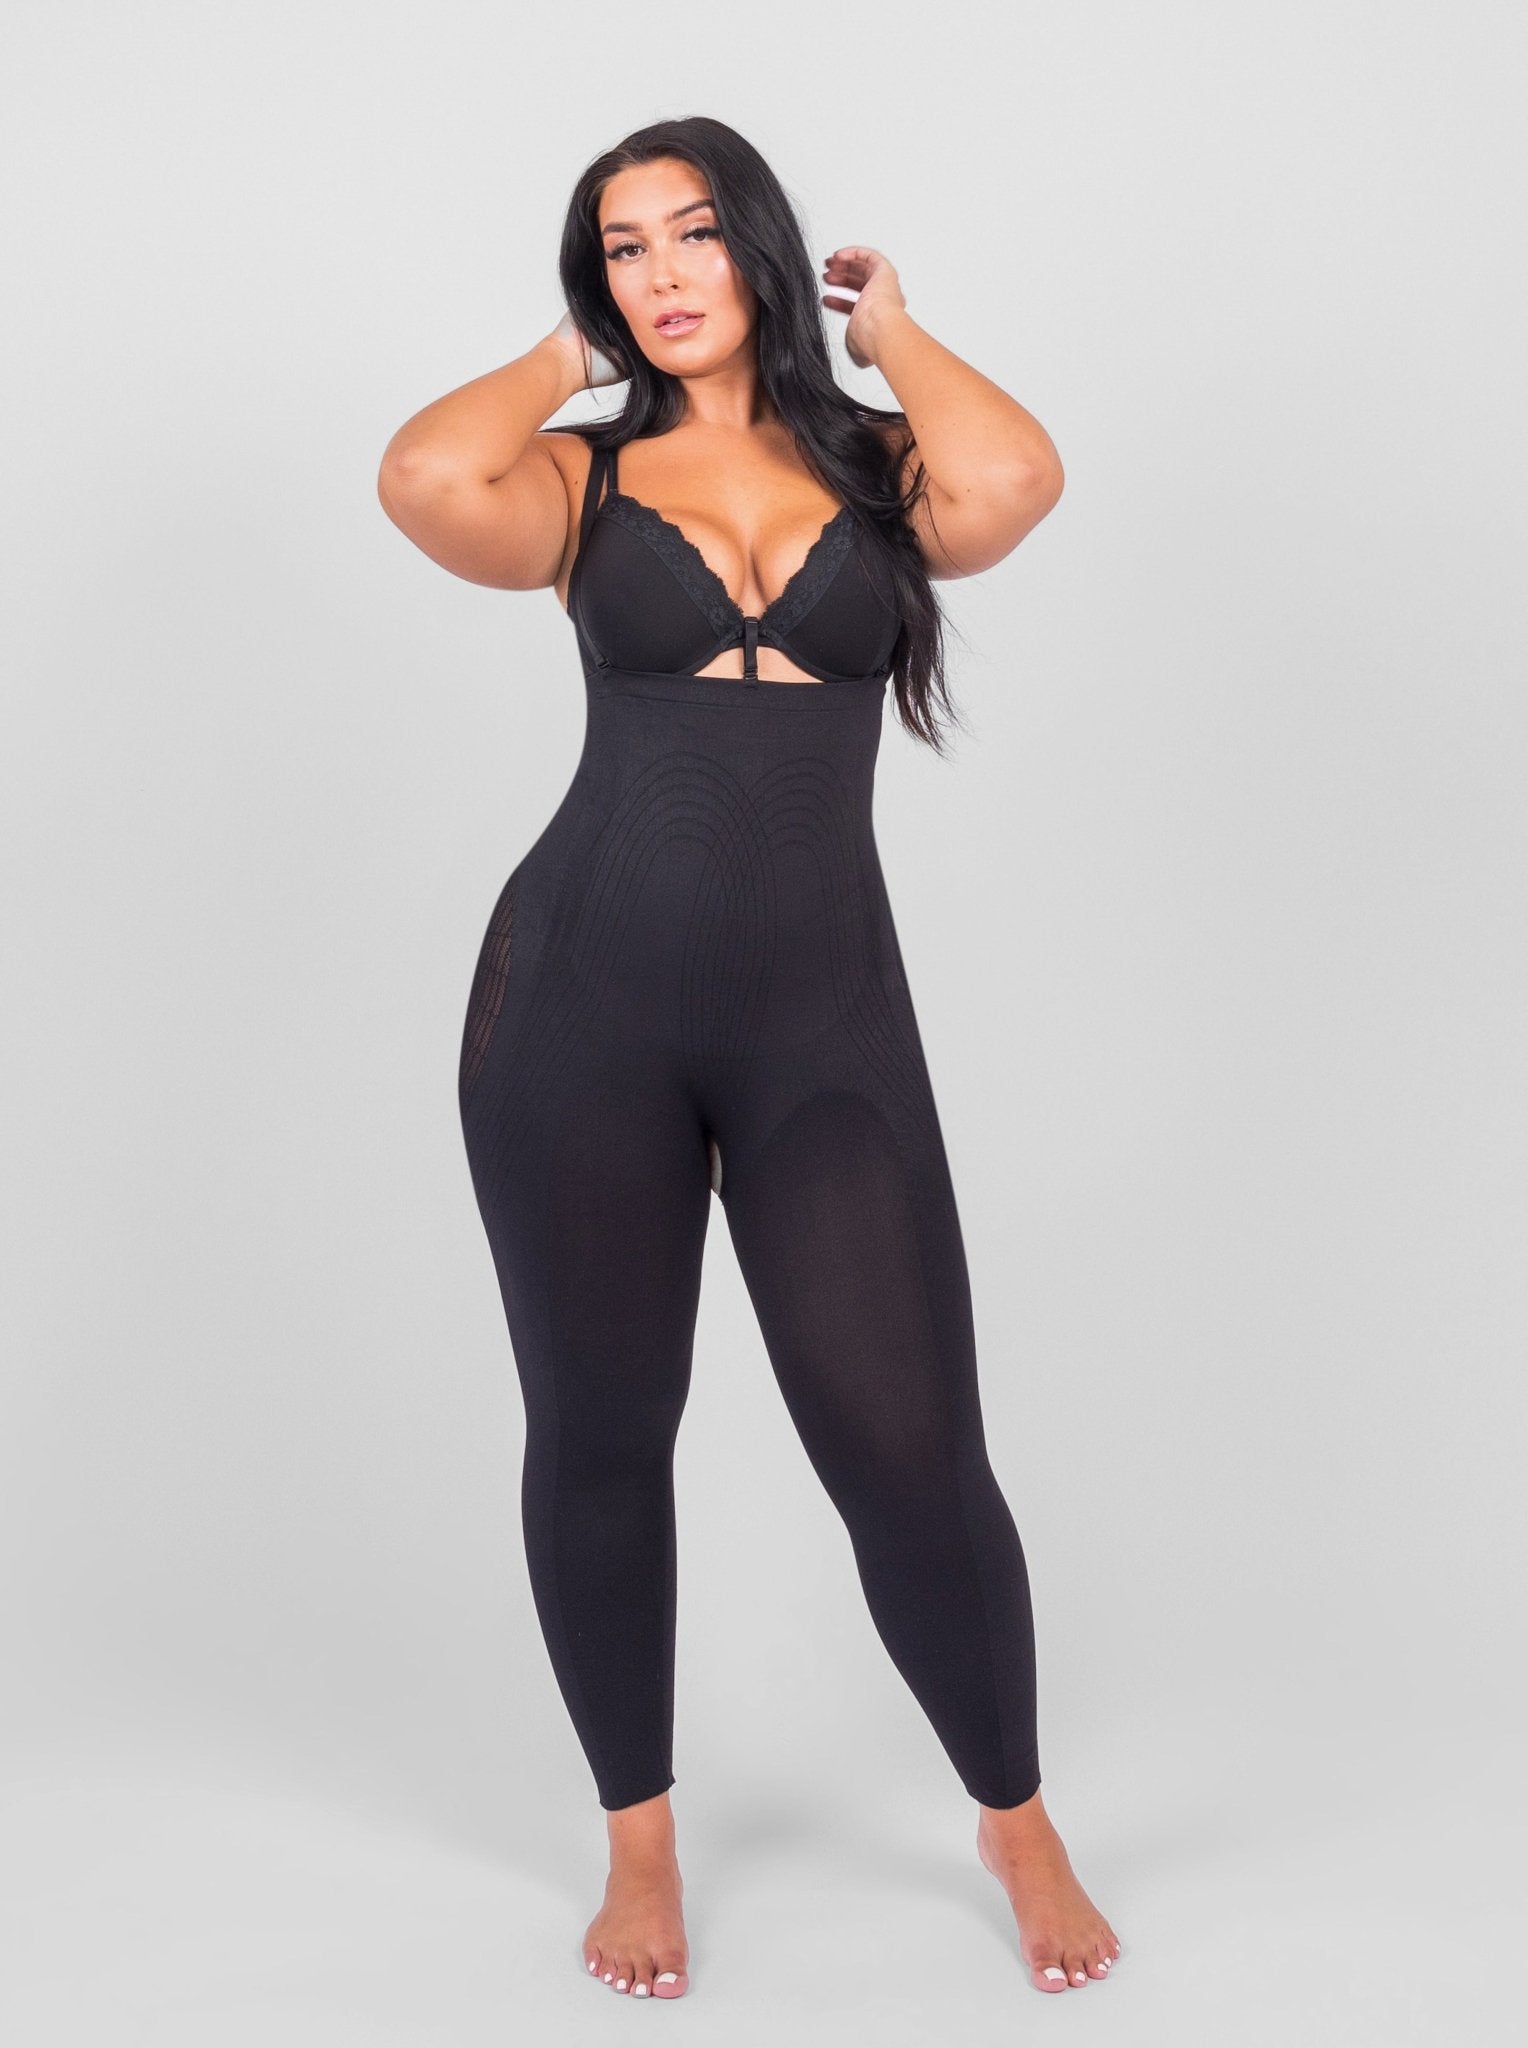 Valentina 2.0 - High Waisted Body Shaper 3 Rows of Hooks and Boning